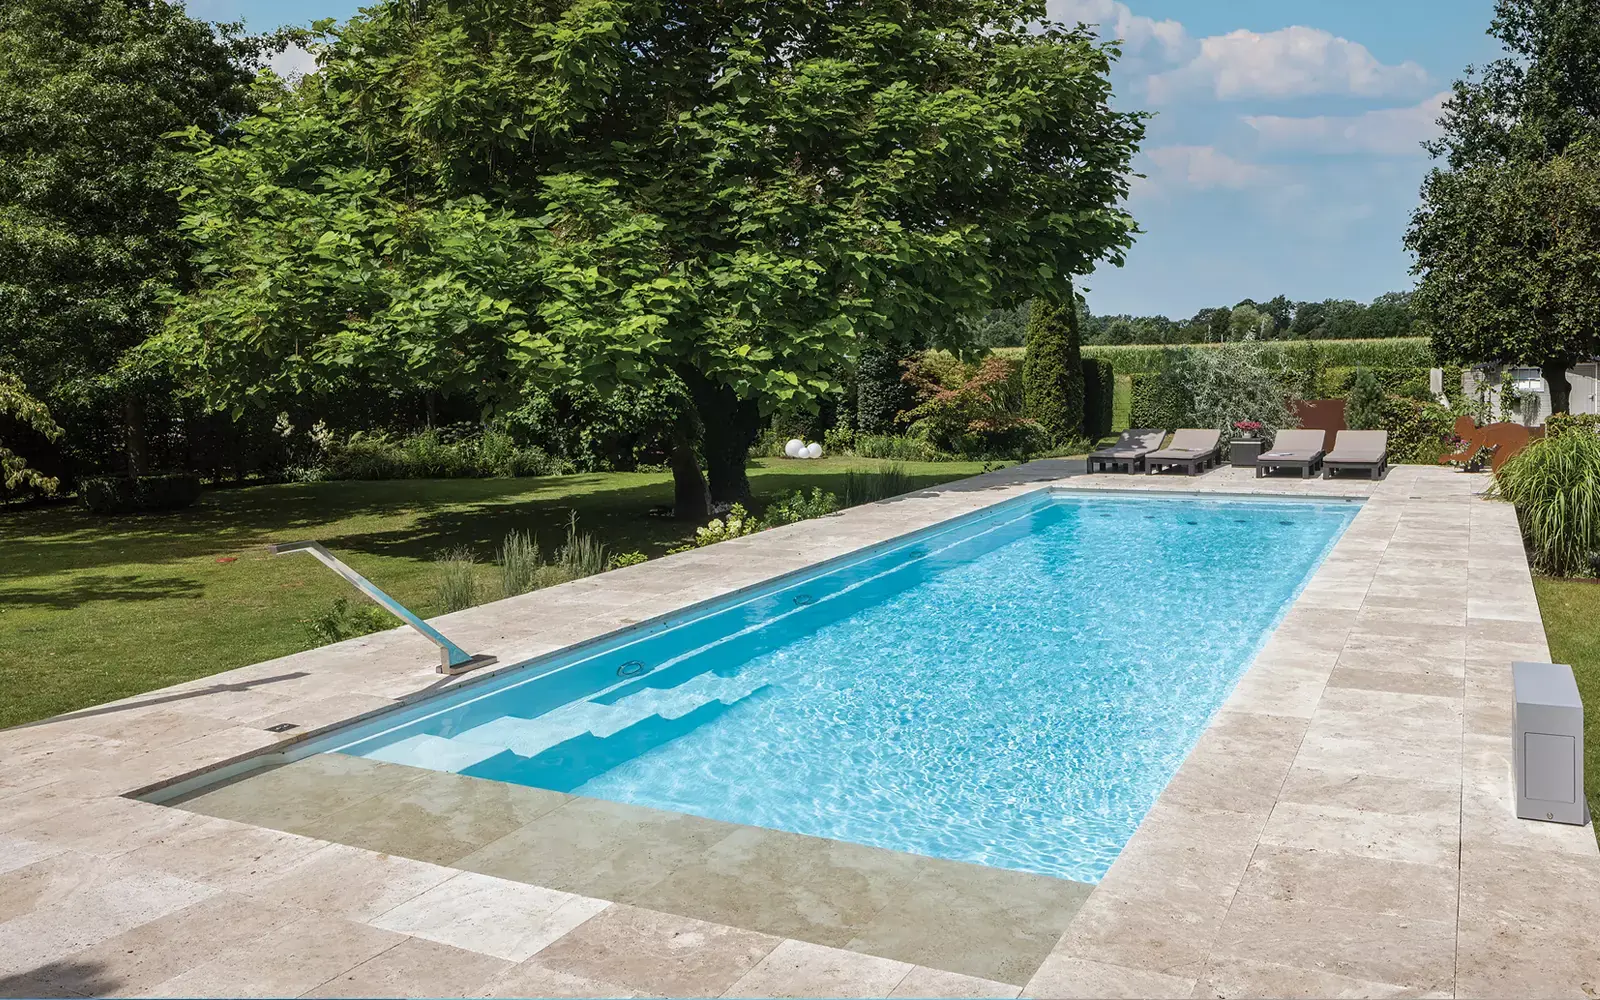 The Definitive, a fiberglass pool design by Leisure Pools